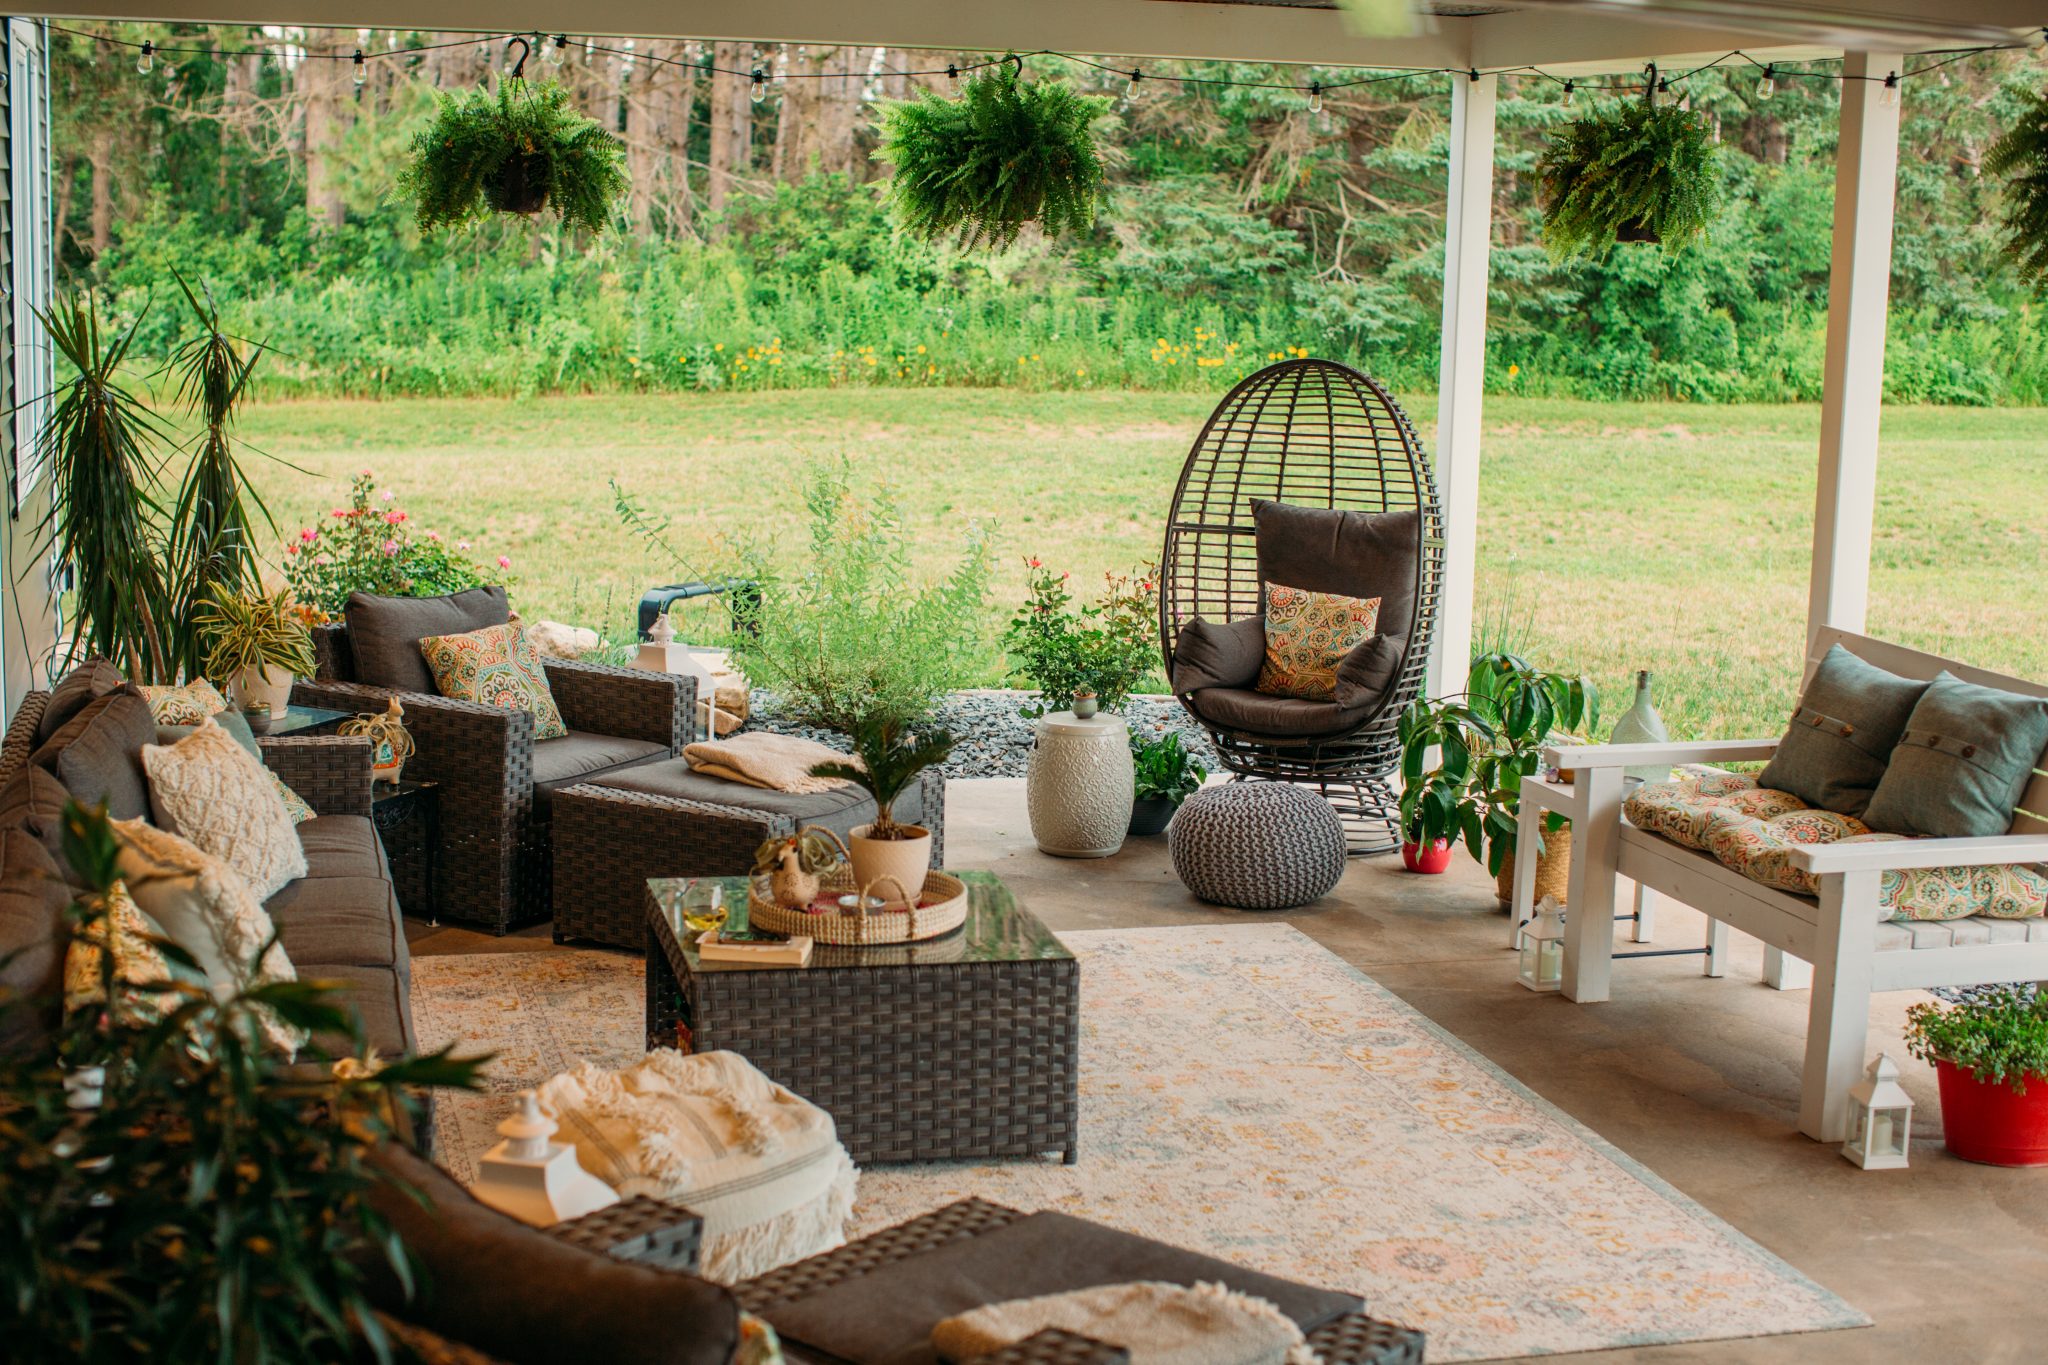 Our cozy backyard patio seating area, complete with a nine-piece outdoor sofa and chair set, a comfortable egg chair, and white bench, all decorated with plenty of pillows and cozy blankets.